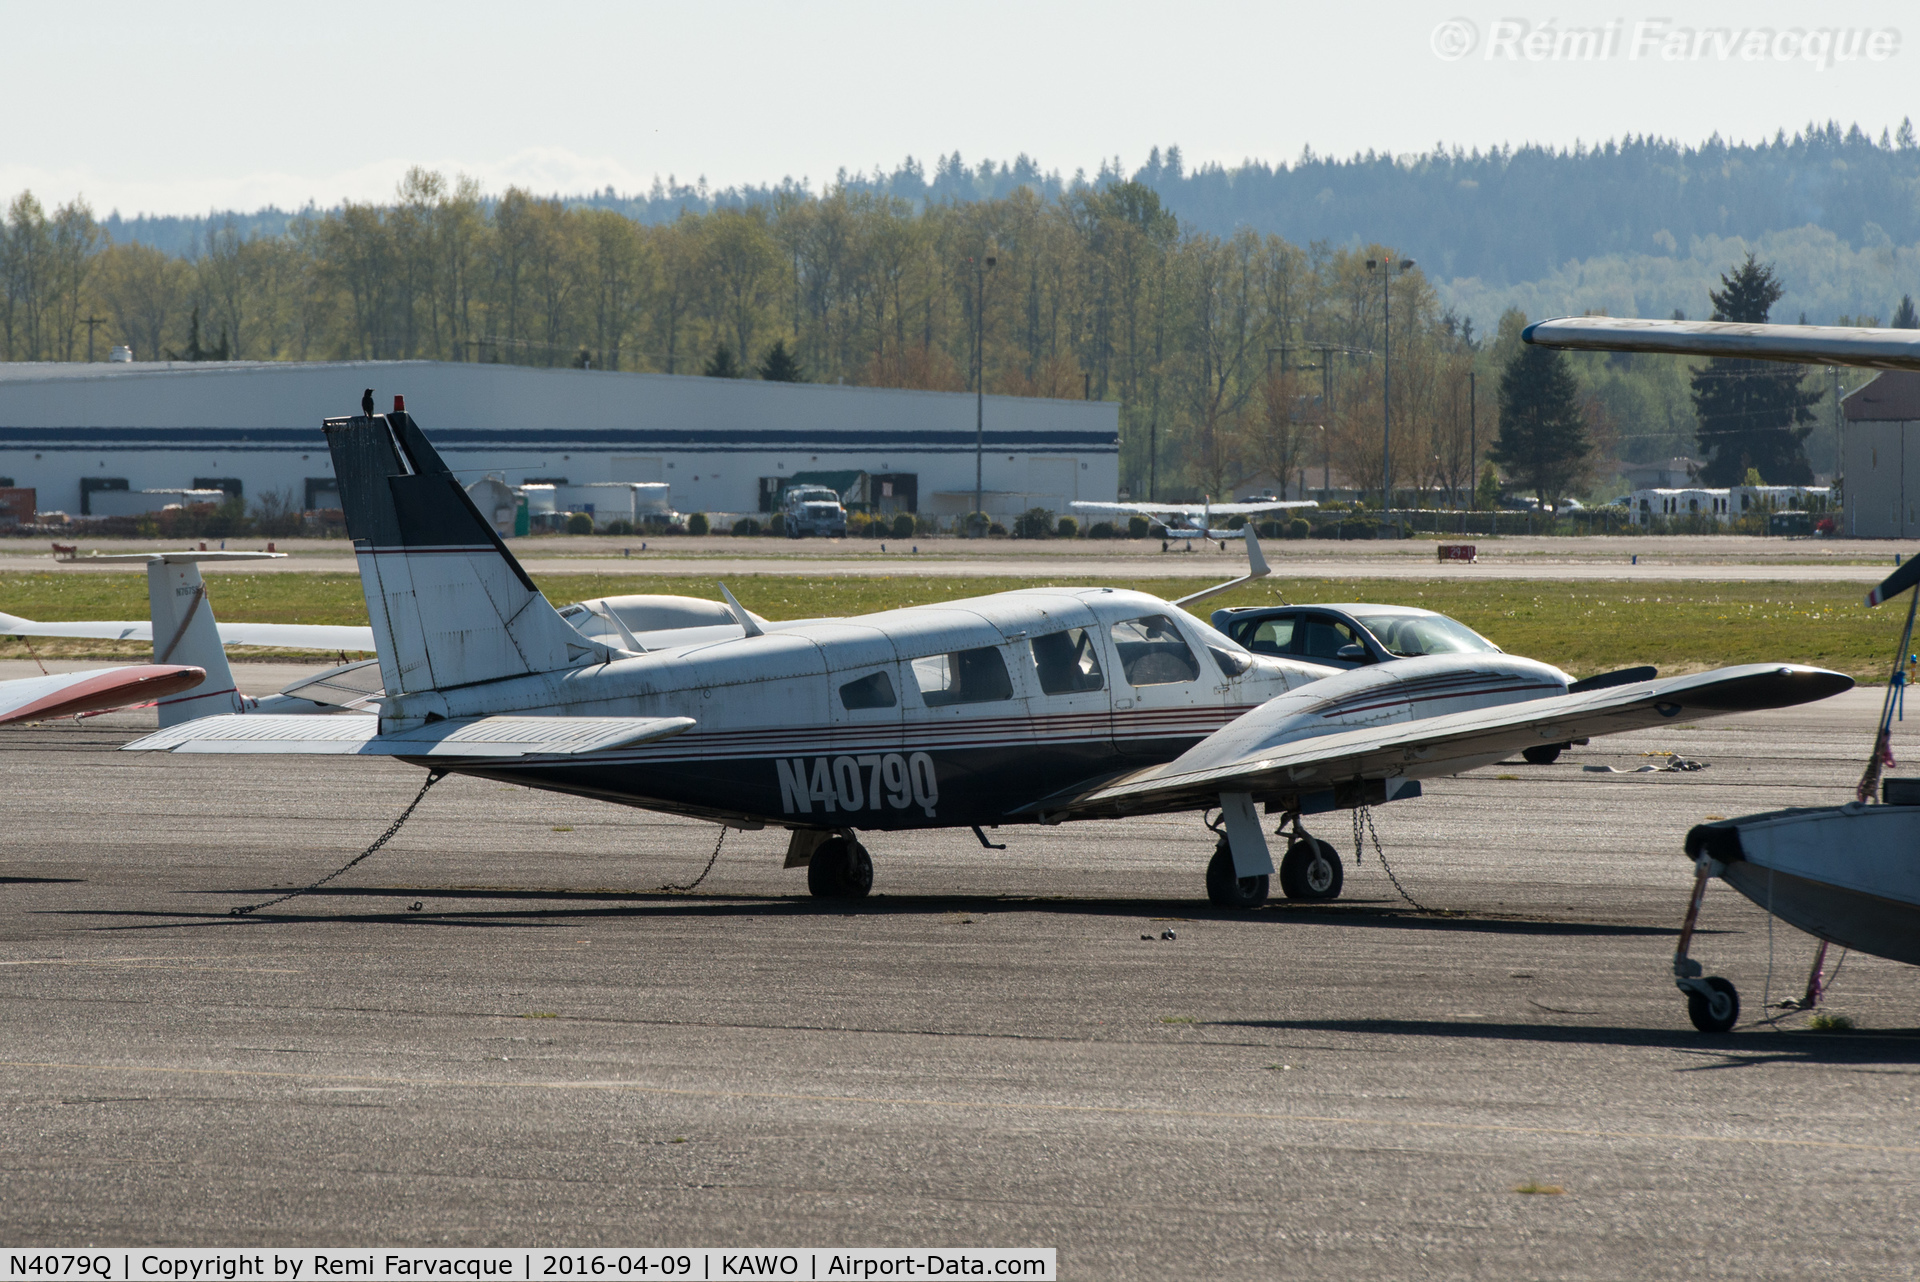 N4079Q, 1977 Piper PA-34-200T C/N 34-7770237, Parked south of main terminal building.